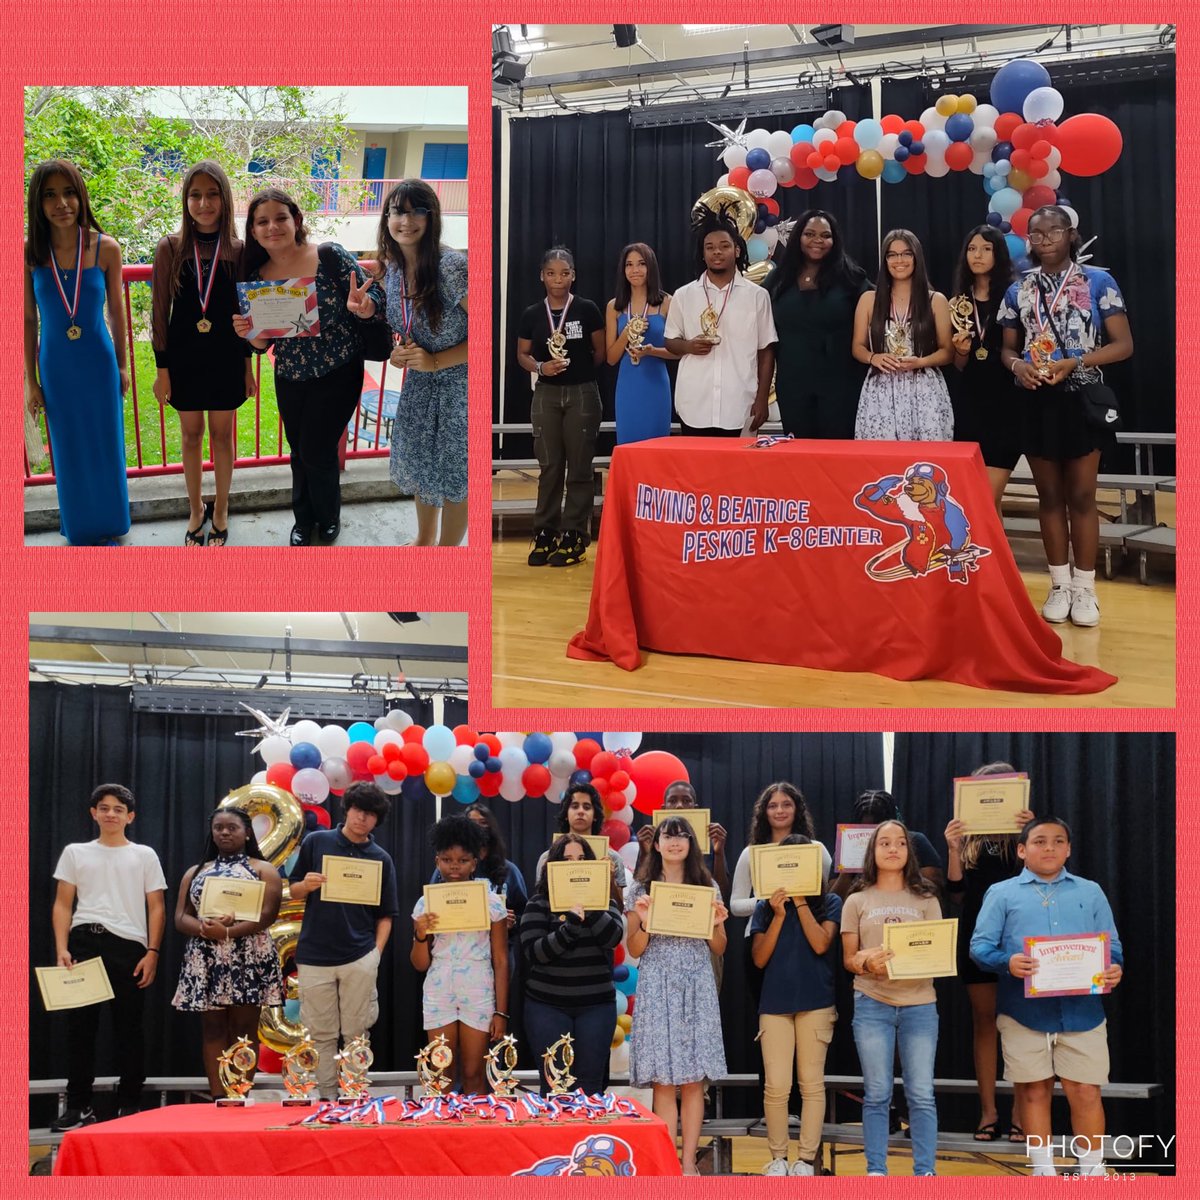 Congrats to our sixth and seventh grade students!! #peskoek-8 #bearnation🐻 #peskoepride❤️ #Aschool #wherethemagichappens✨ @mdcpssouth @miamischools